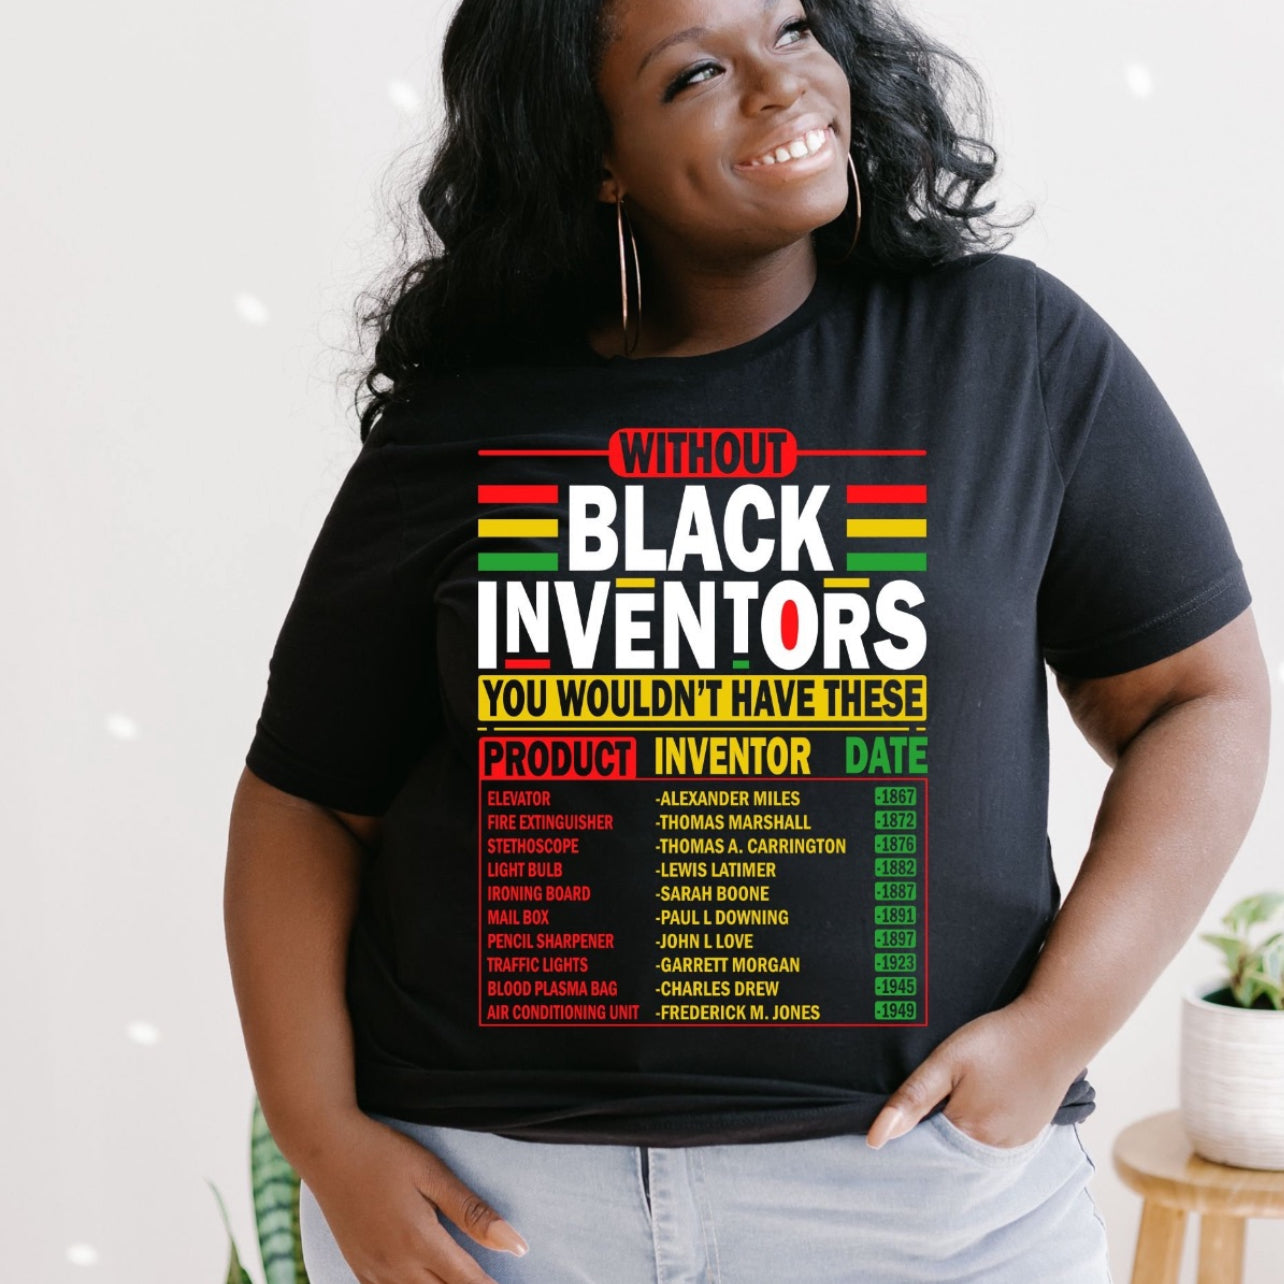 Black History- Inventions